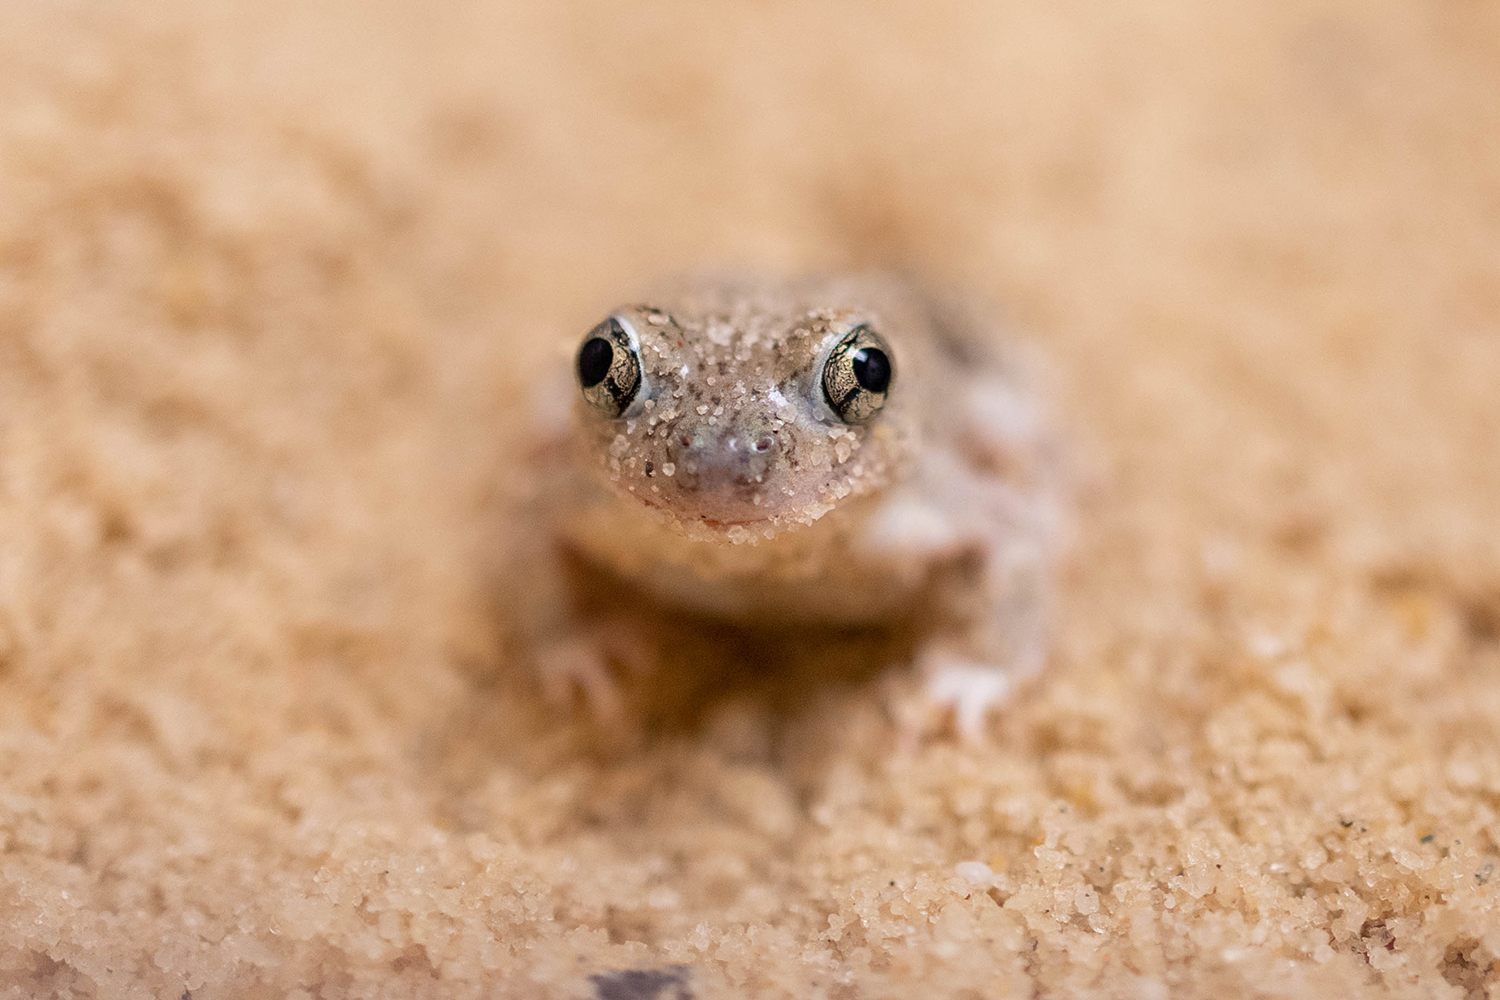 a spadefoot toad sitting in sand